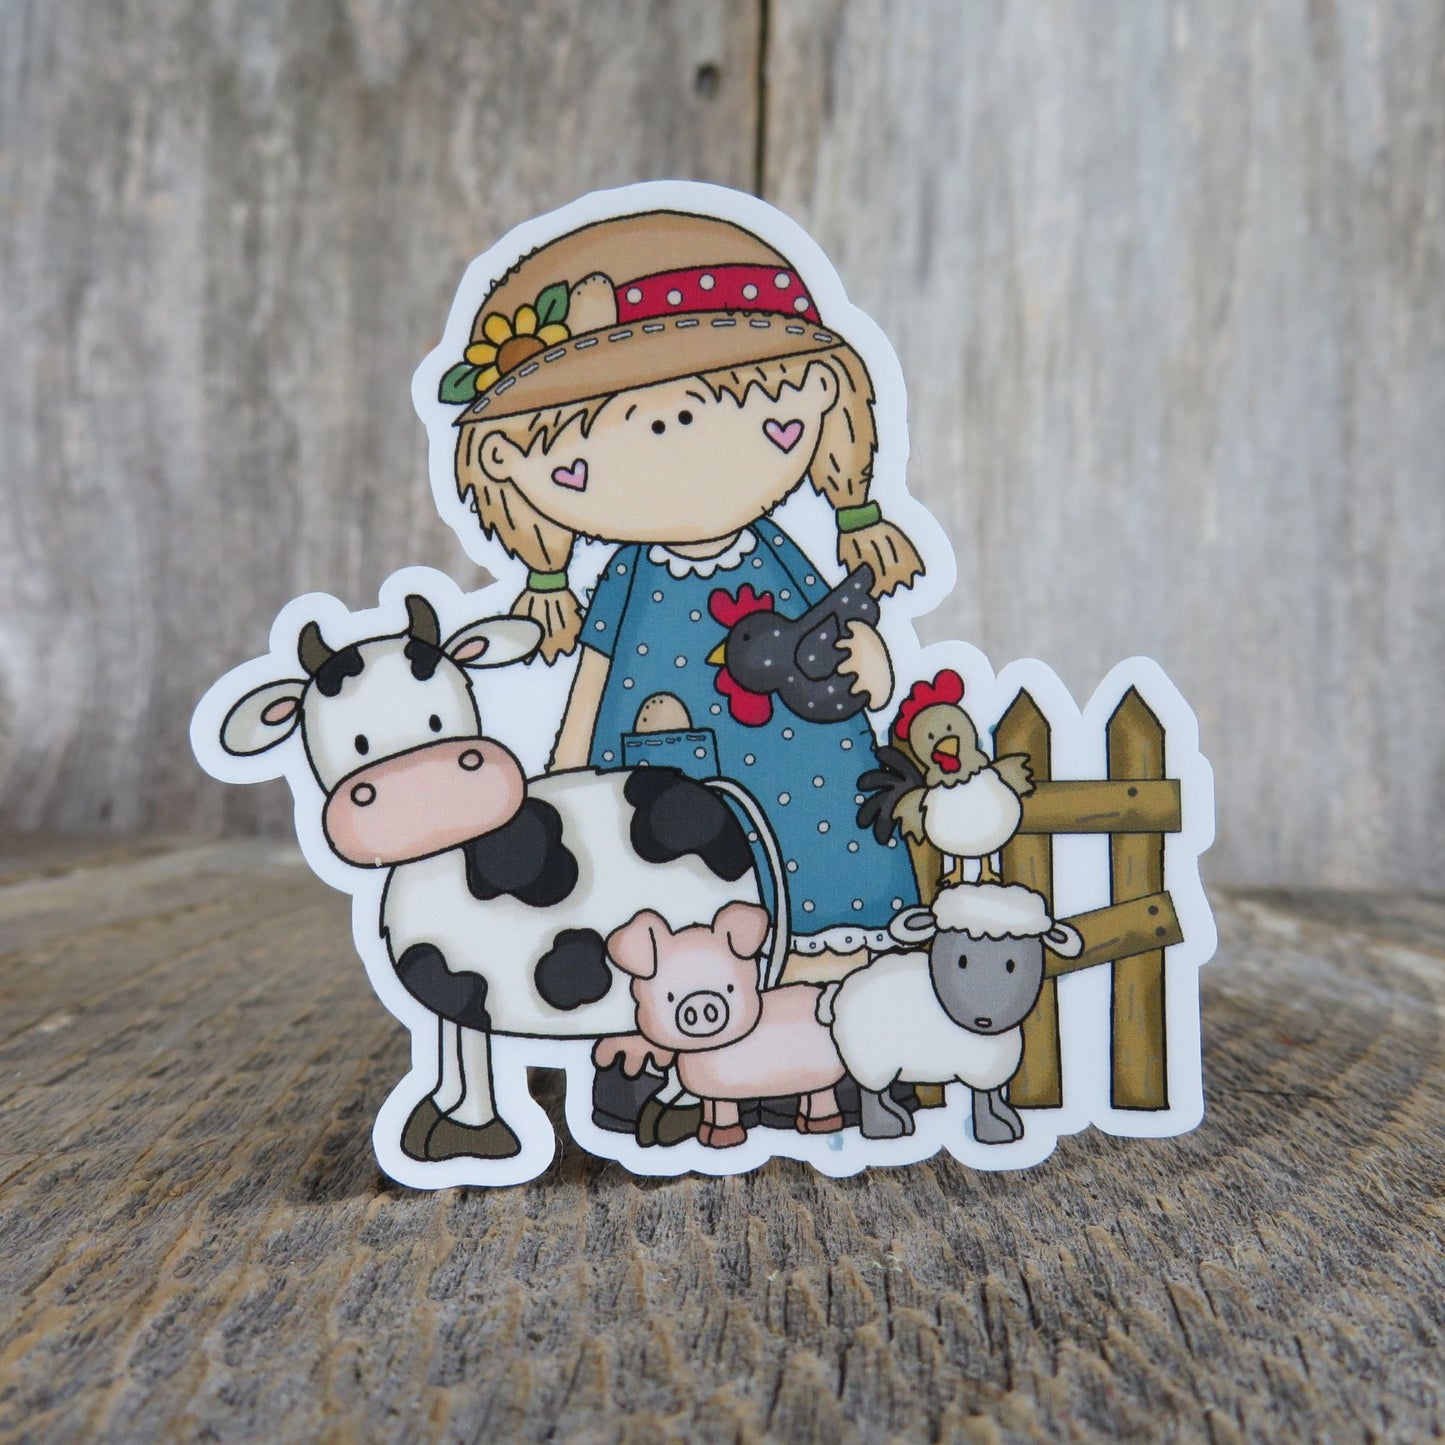 Farmer Girl Sticker Waterproof Urban Farming Country Style Chicken Cows Full Color Blonde Pig